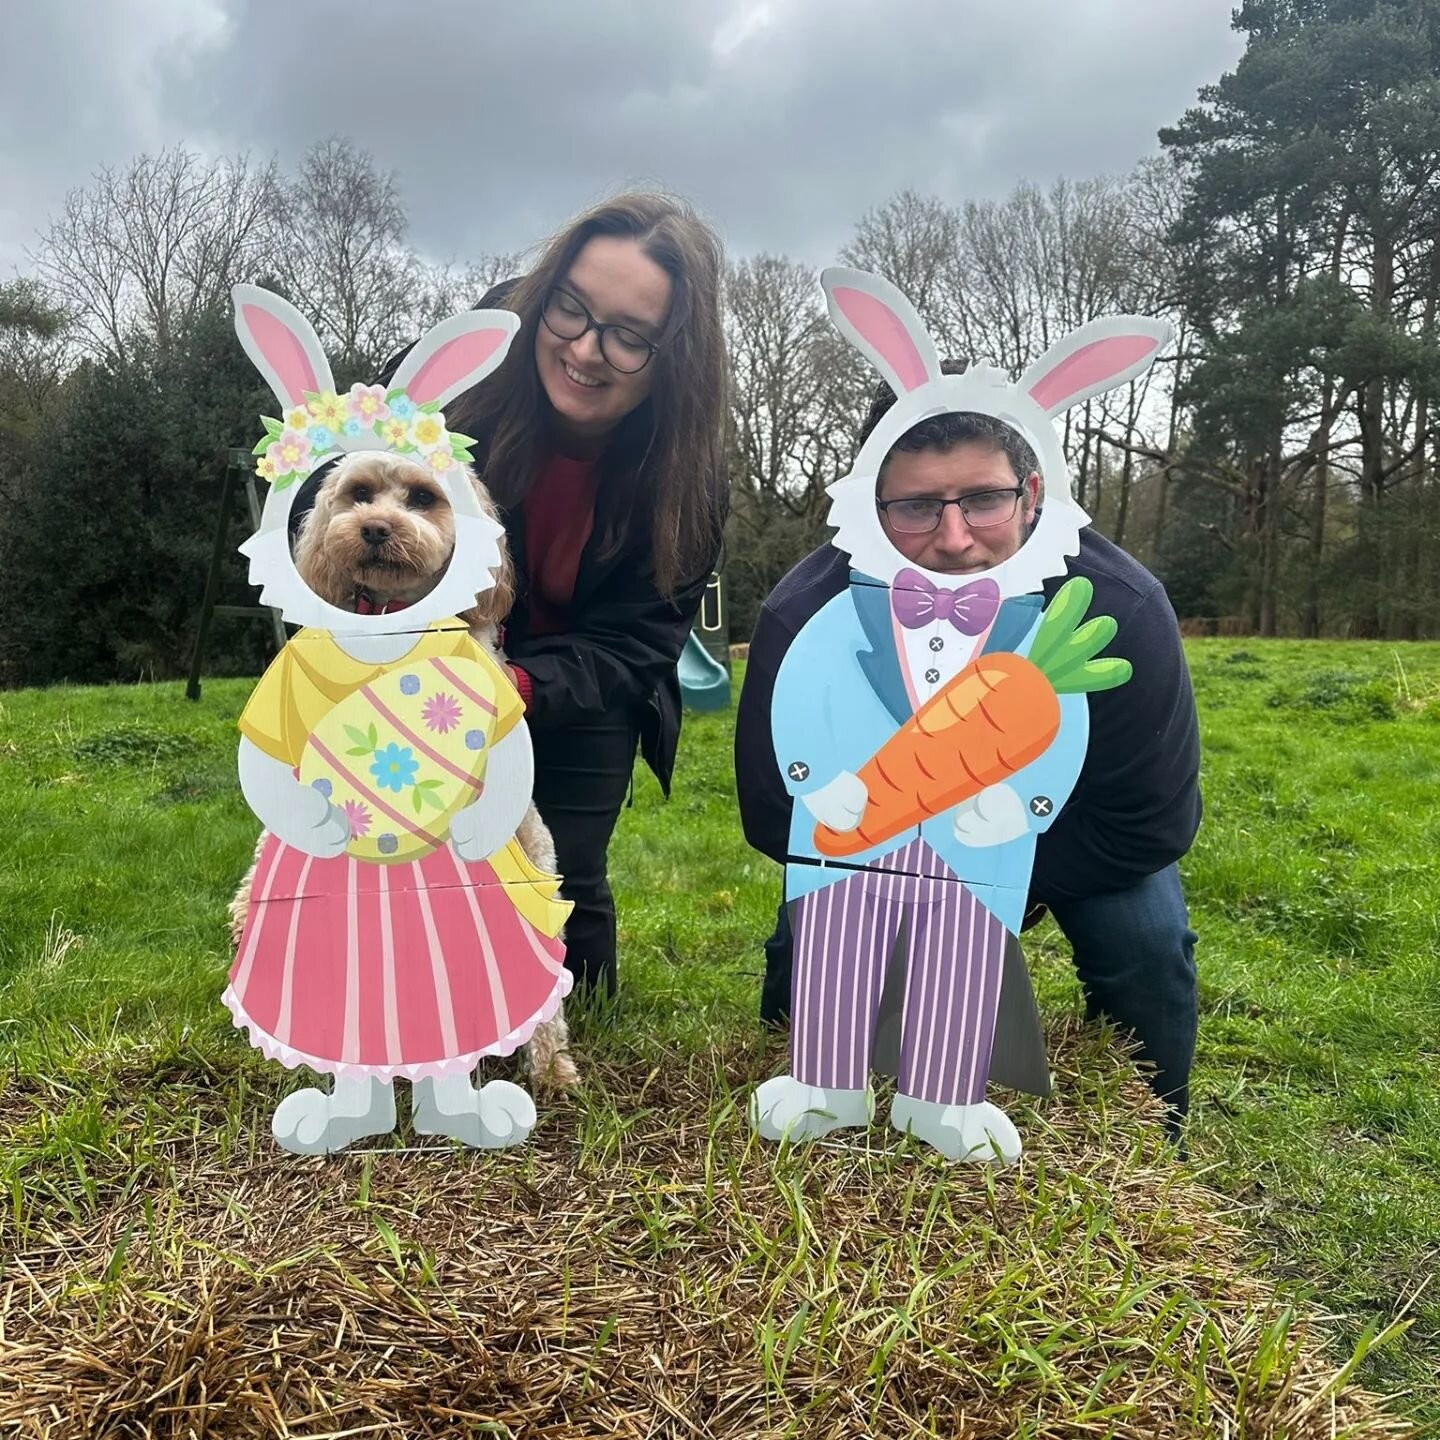 No rain can stop us from celebrating Easter with our lovely children 💚 We had a blast hunting for eggs, bouncing on the castle and eating lots of pizza and ice cream! Could you imagine a better Easter party?? We don't think so! 🥳 🎉 

#ifyoucareyou